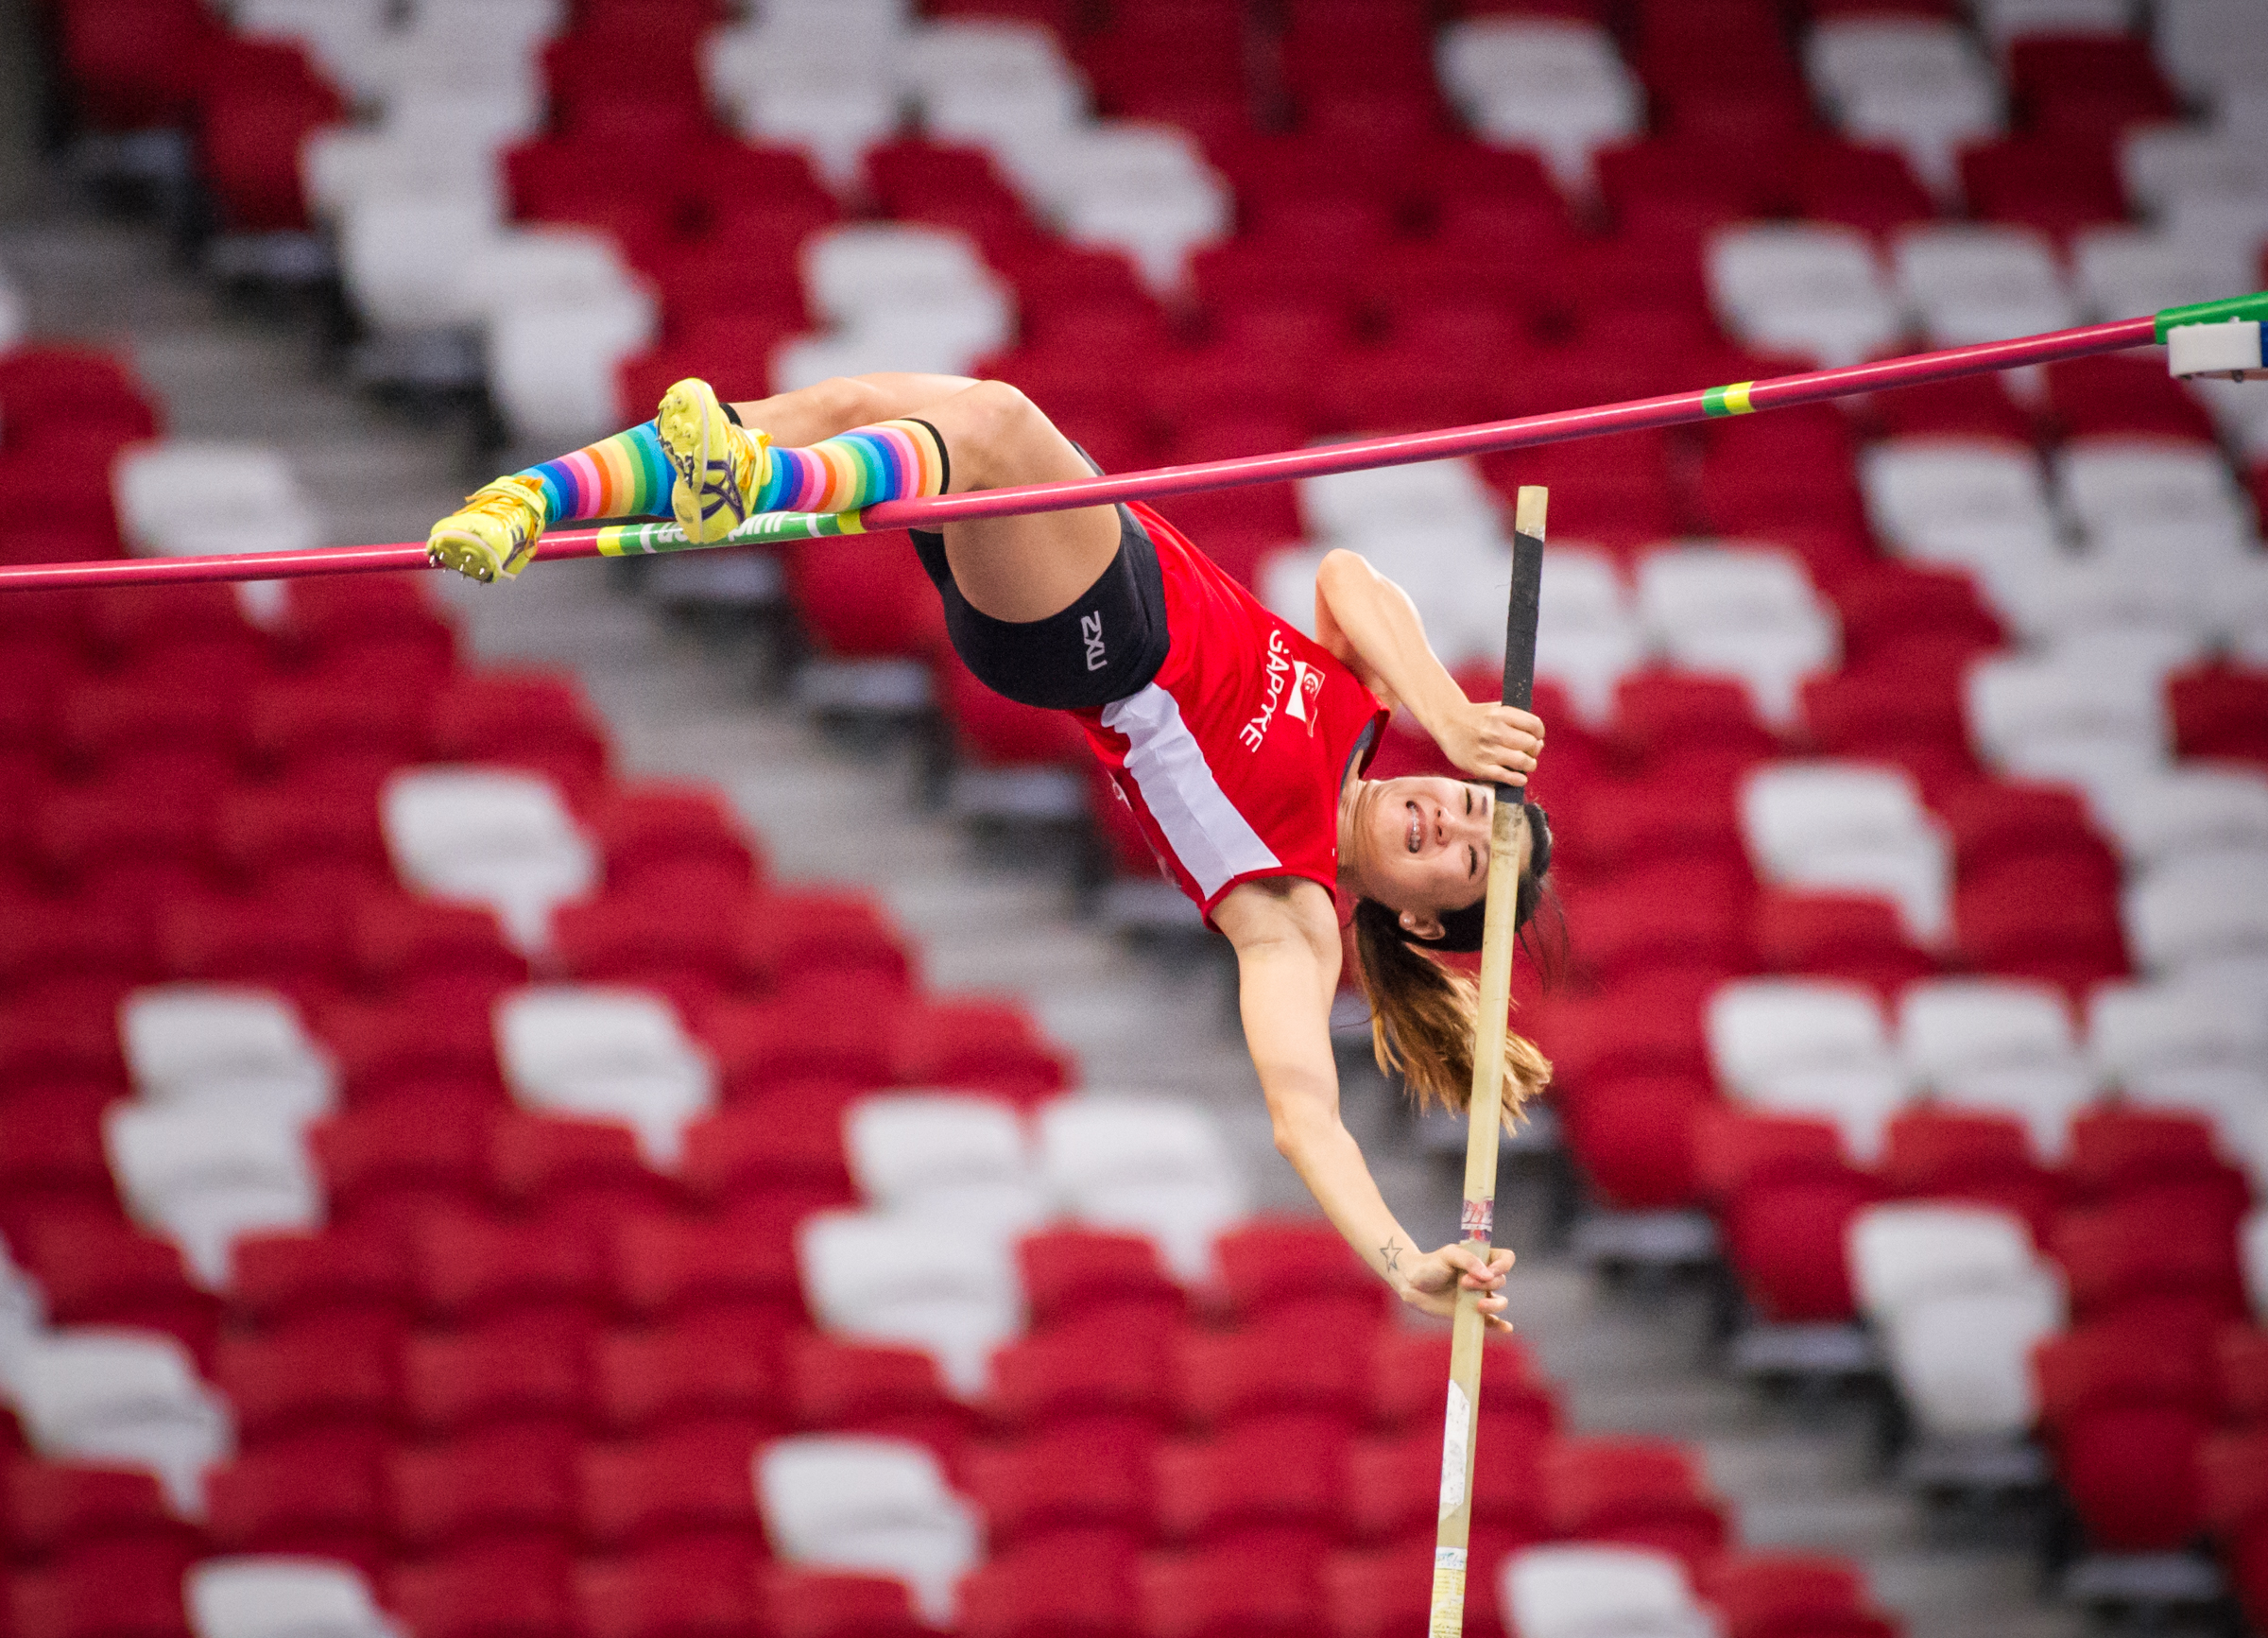 A Singaporean Pole Vaulter prepares to fly over the bar during the Singapore Open Track and Field Championships held at the Singapore Sports Hub.